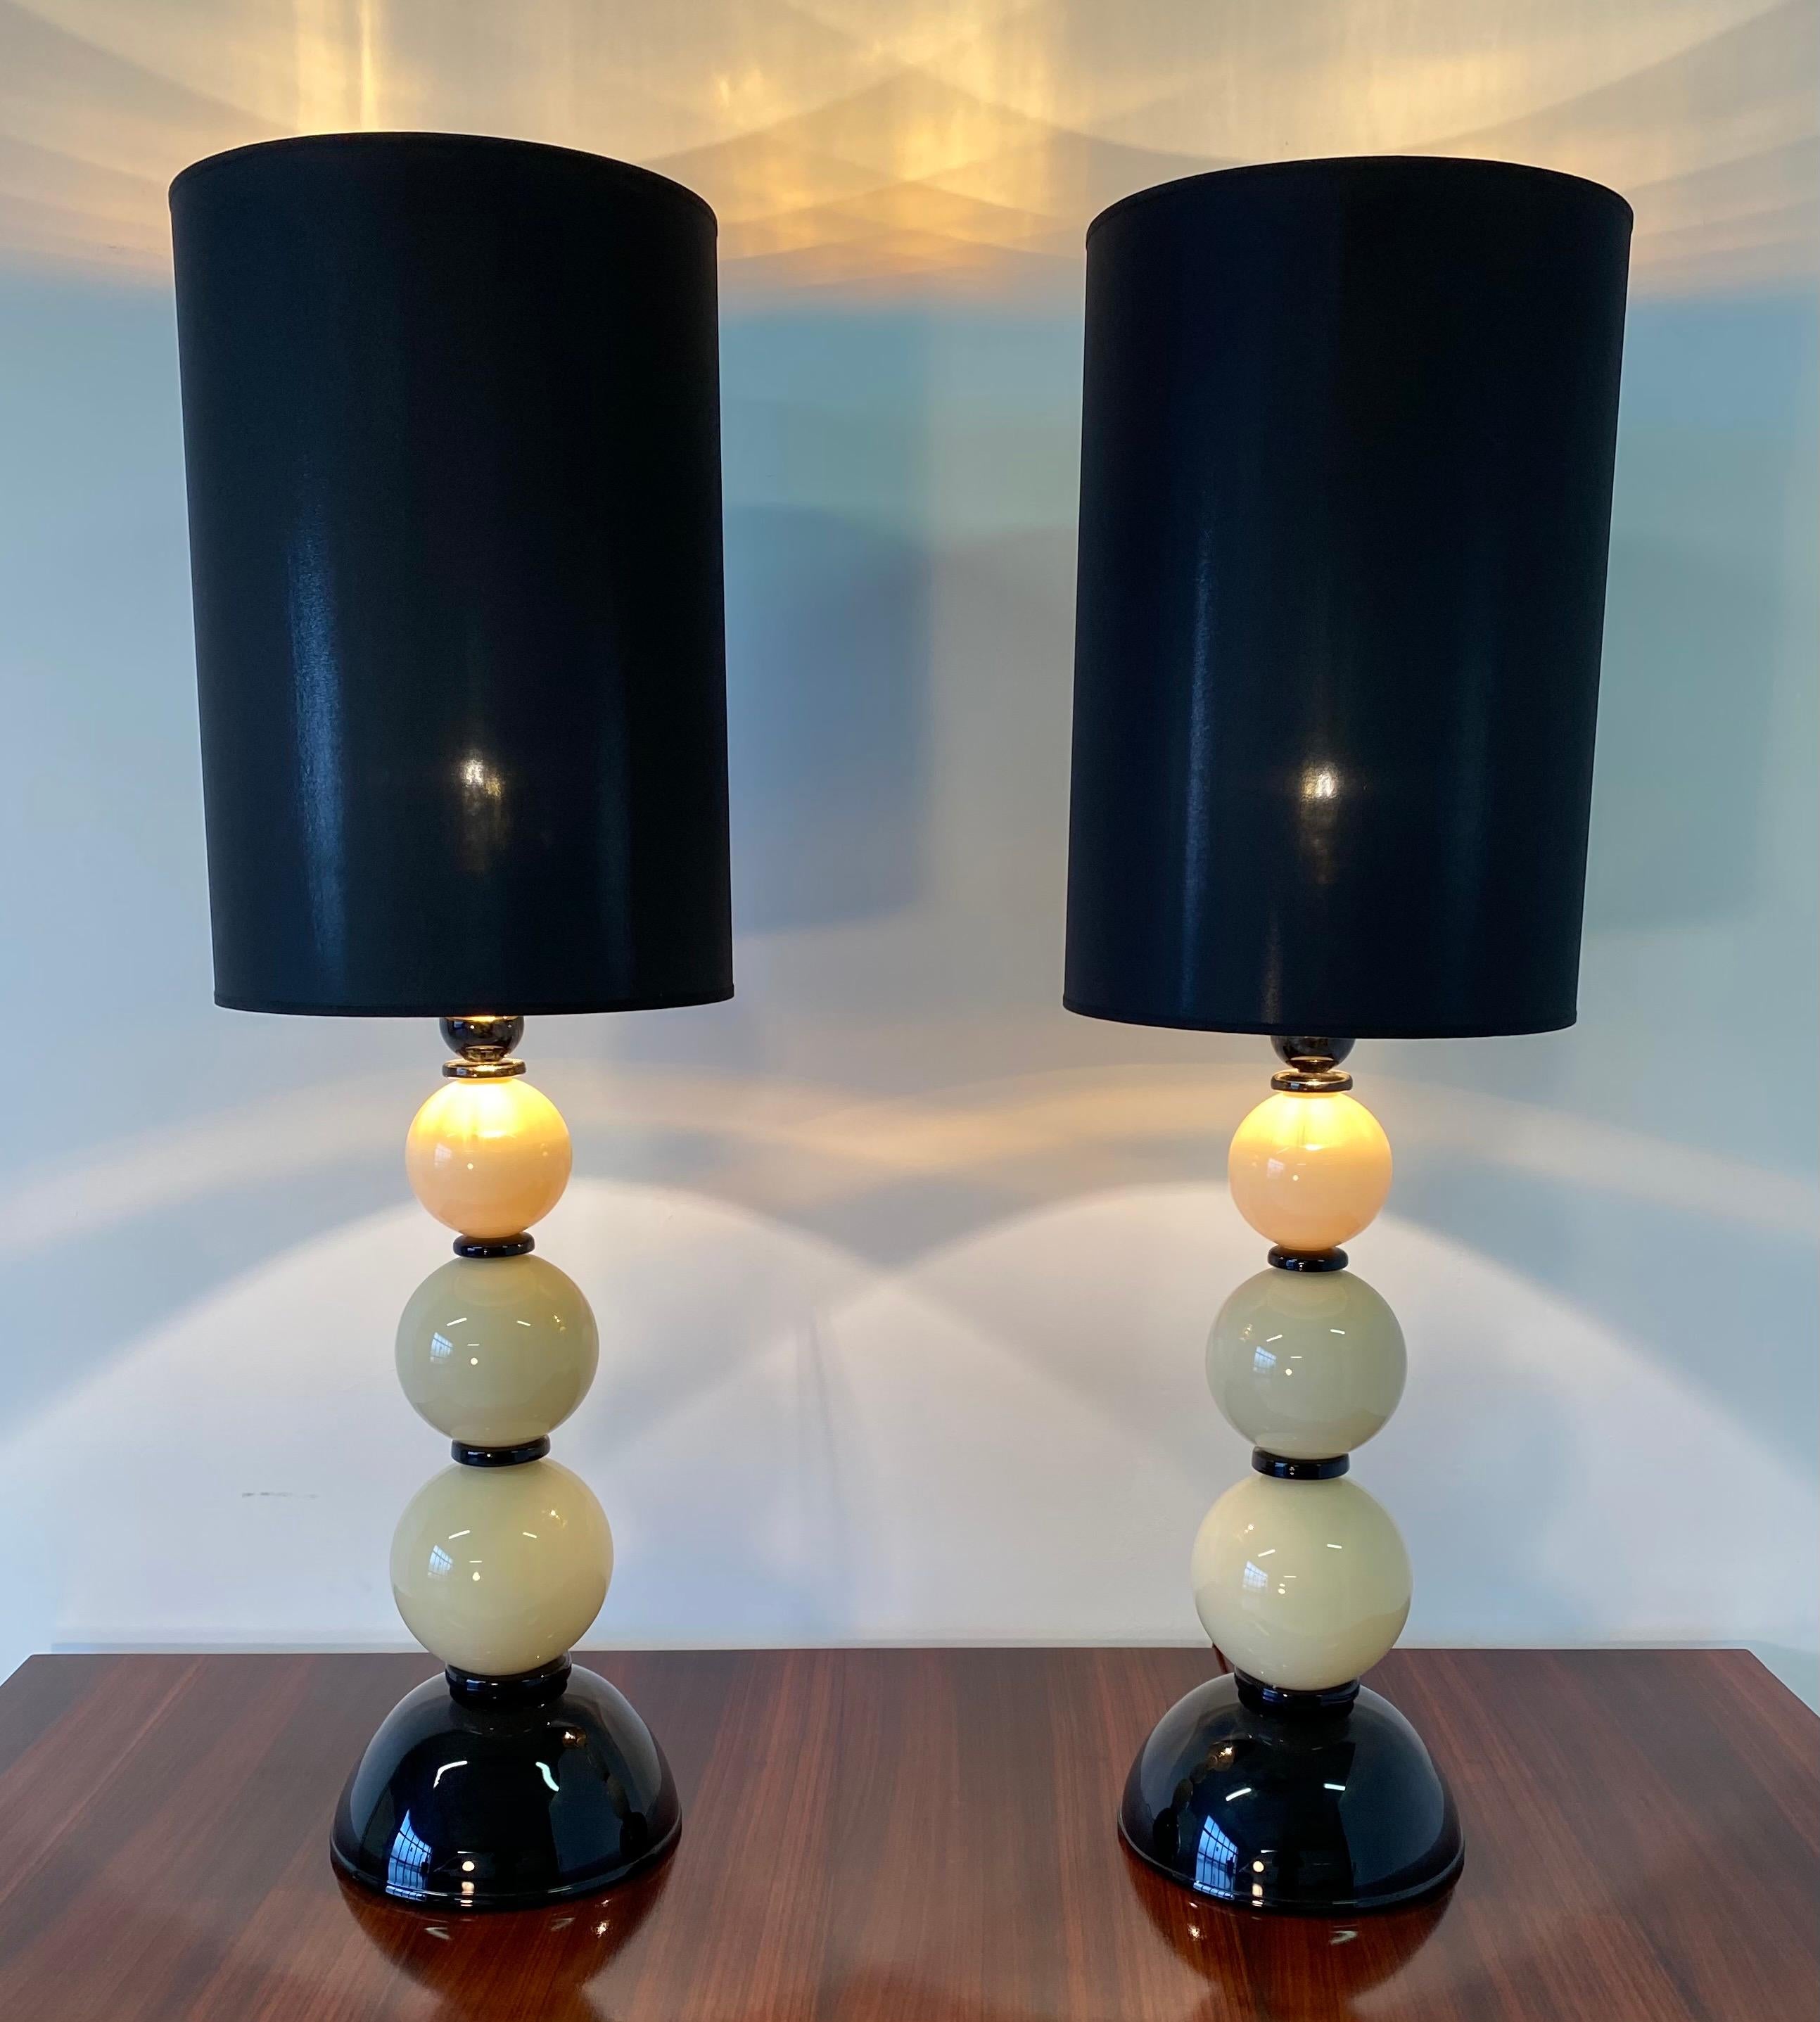 These lamps were produced in Murano in Italy, circa 2000s.
The lamps are entirely in pieces of Murano glass made by hand by master craftsmen.
The lampshades are in black silk while inside they are in gold so as to create a special and warm effect